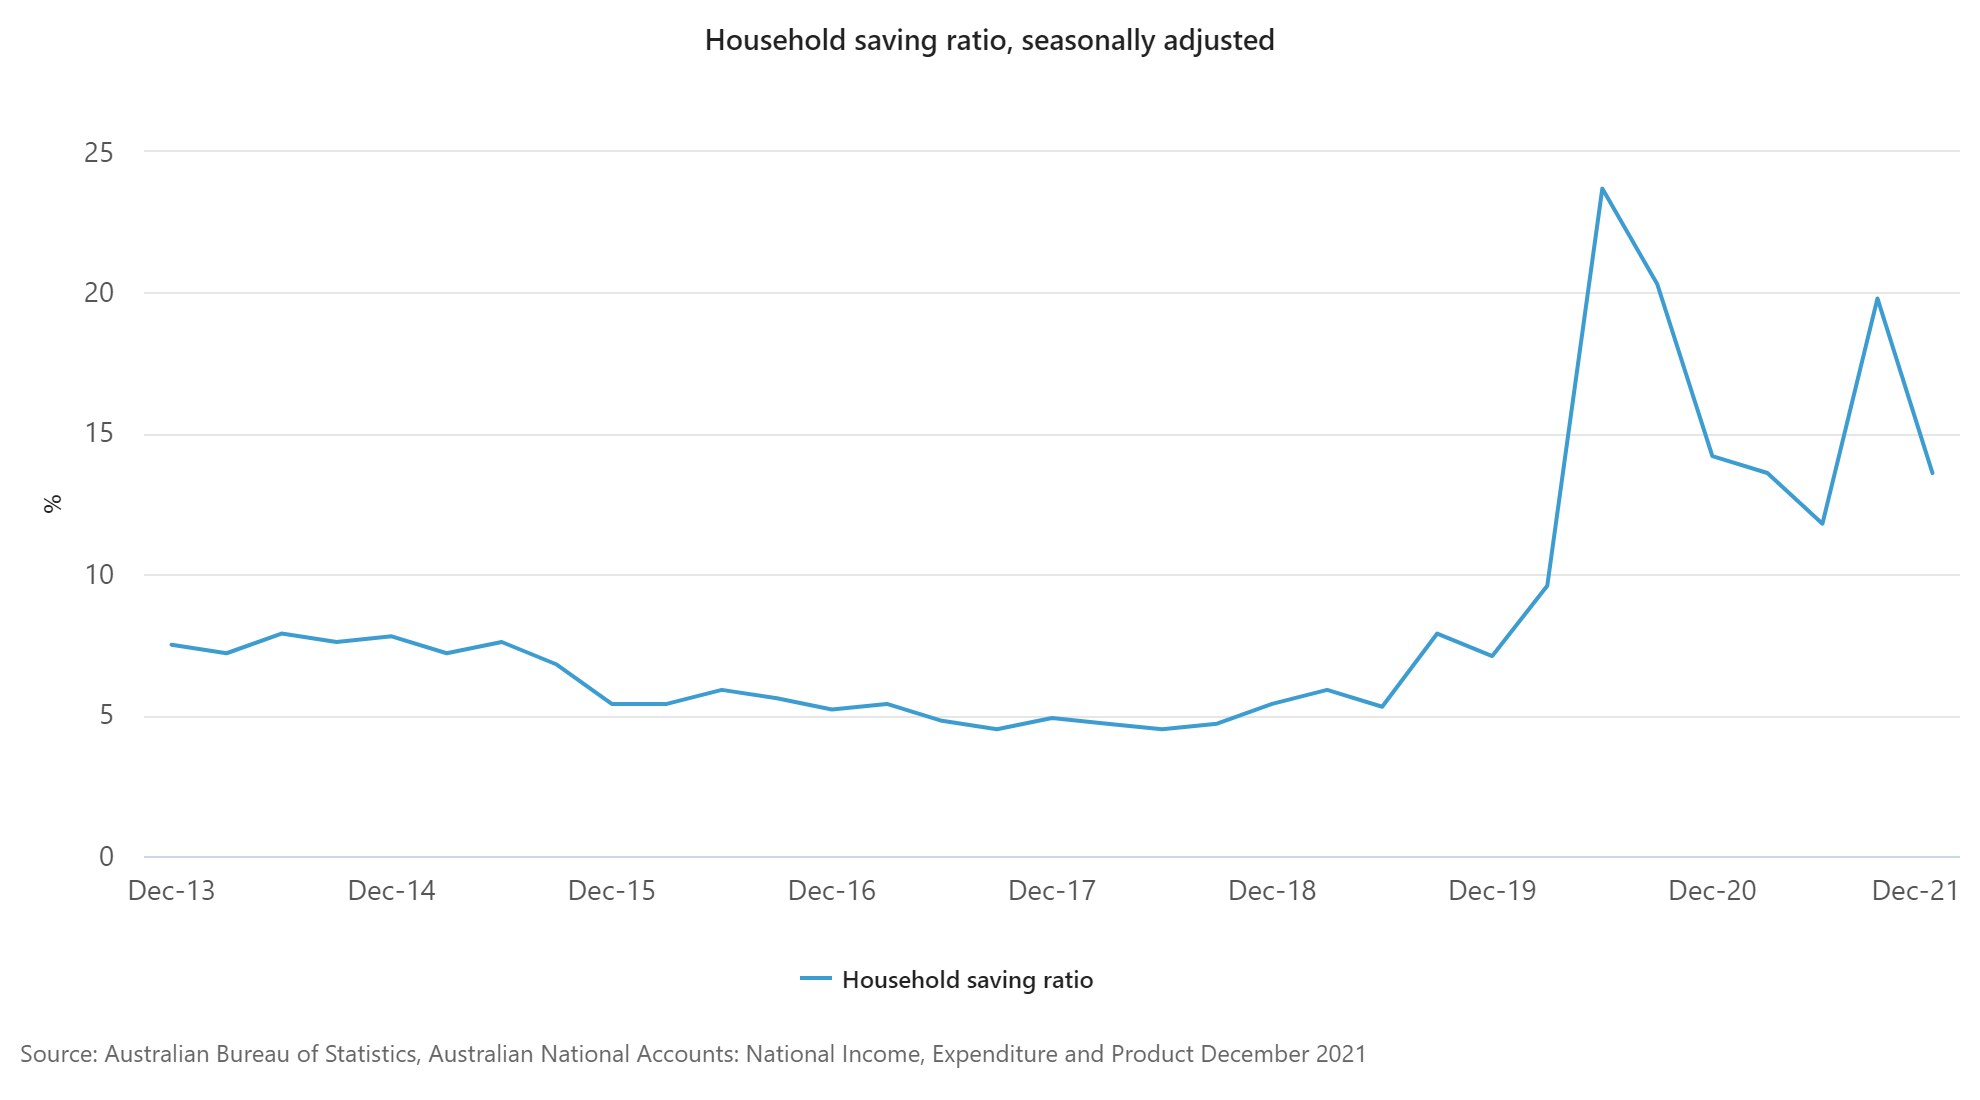 Household saving has fallen back from lockdown peaks, but remains well above pre-pandemic levels.